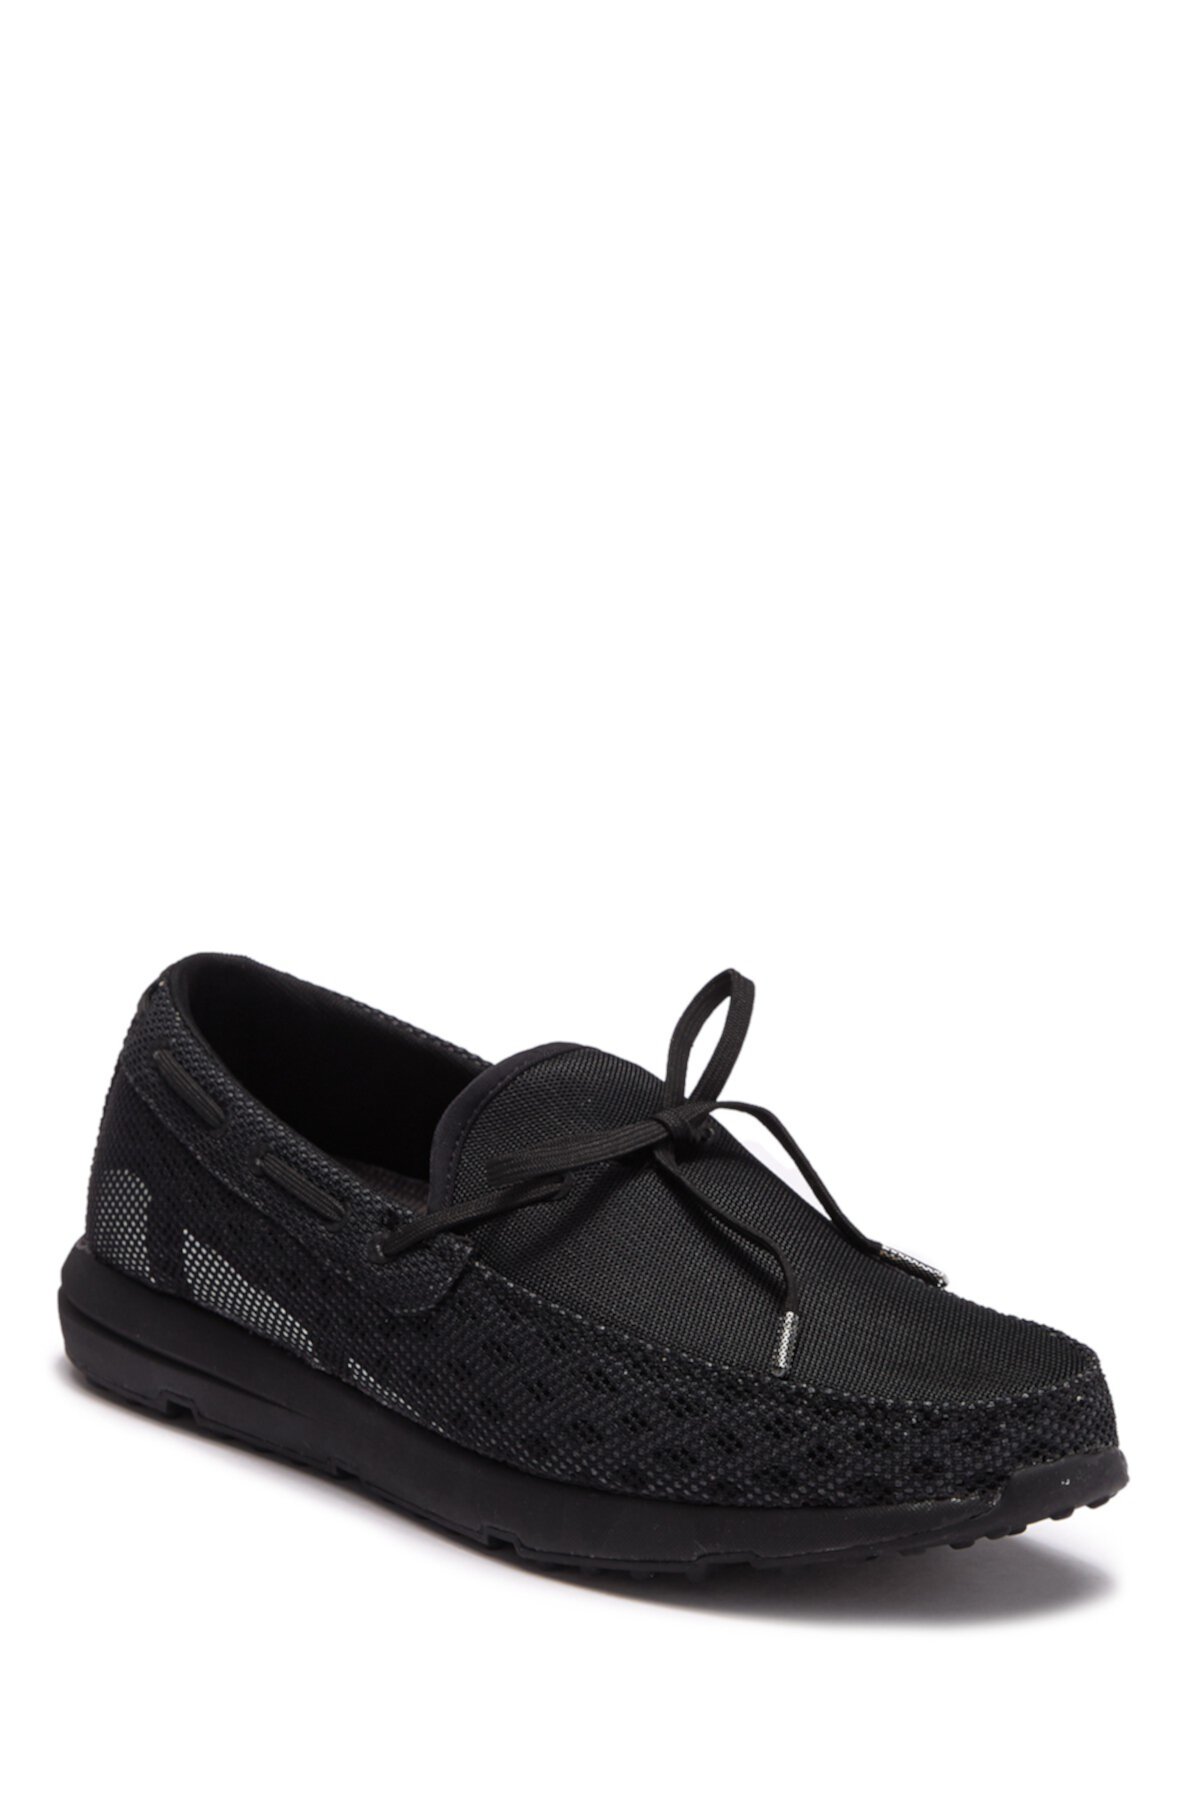 Breeze Leap Laser Loafer SWIMS